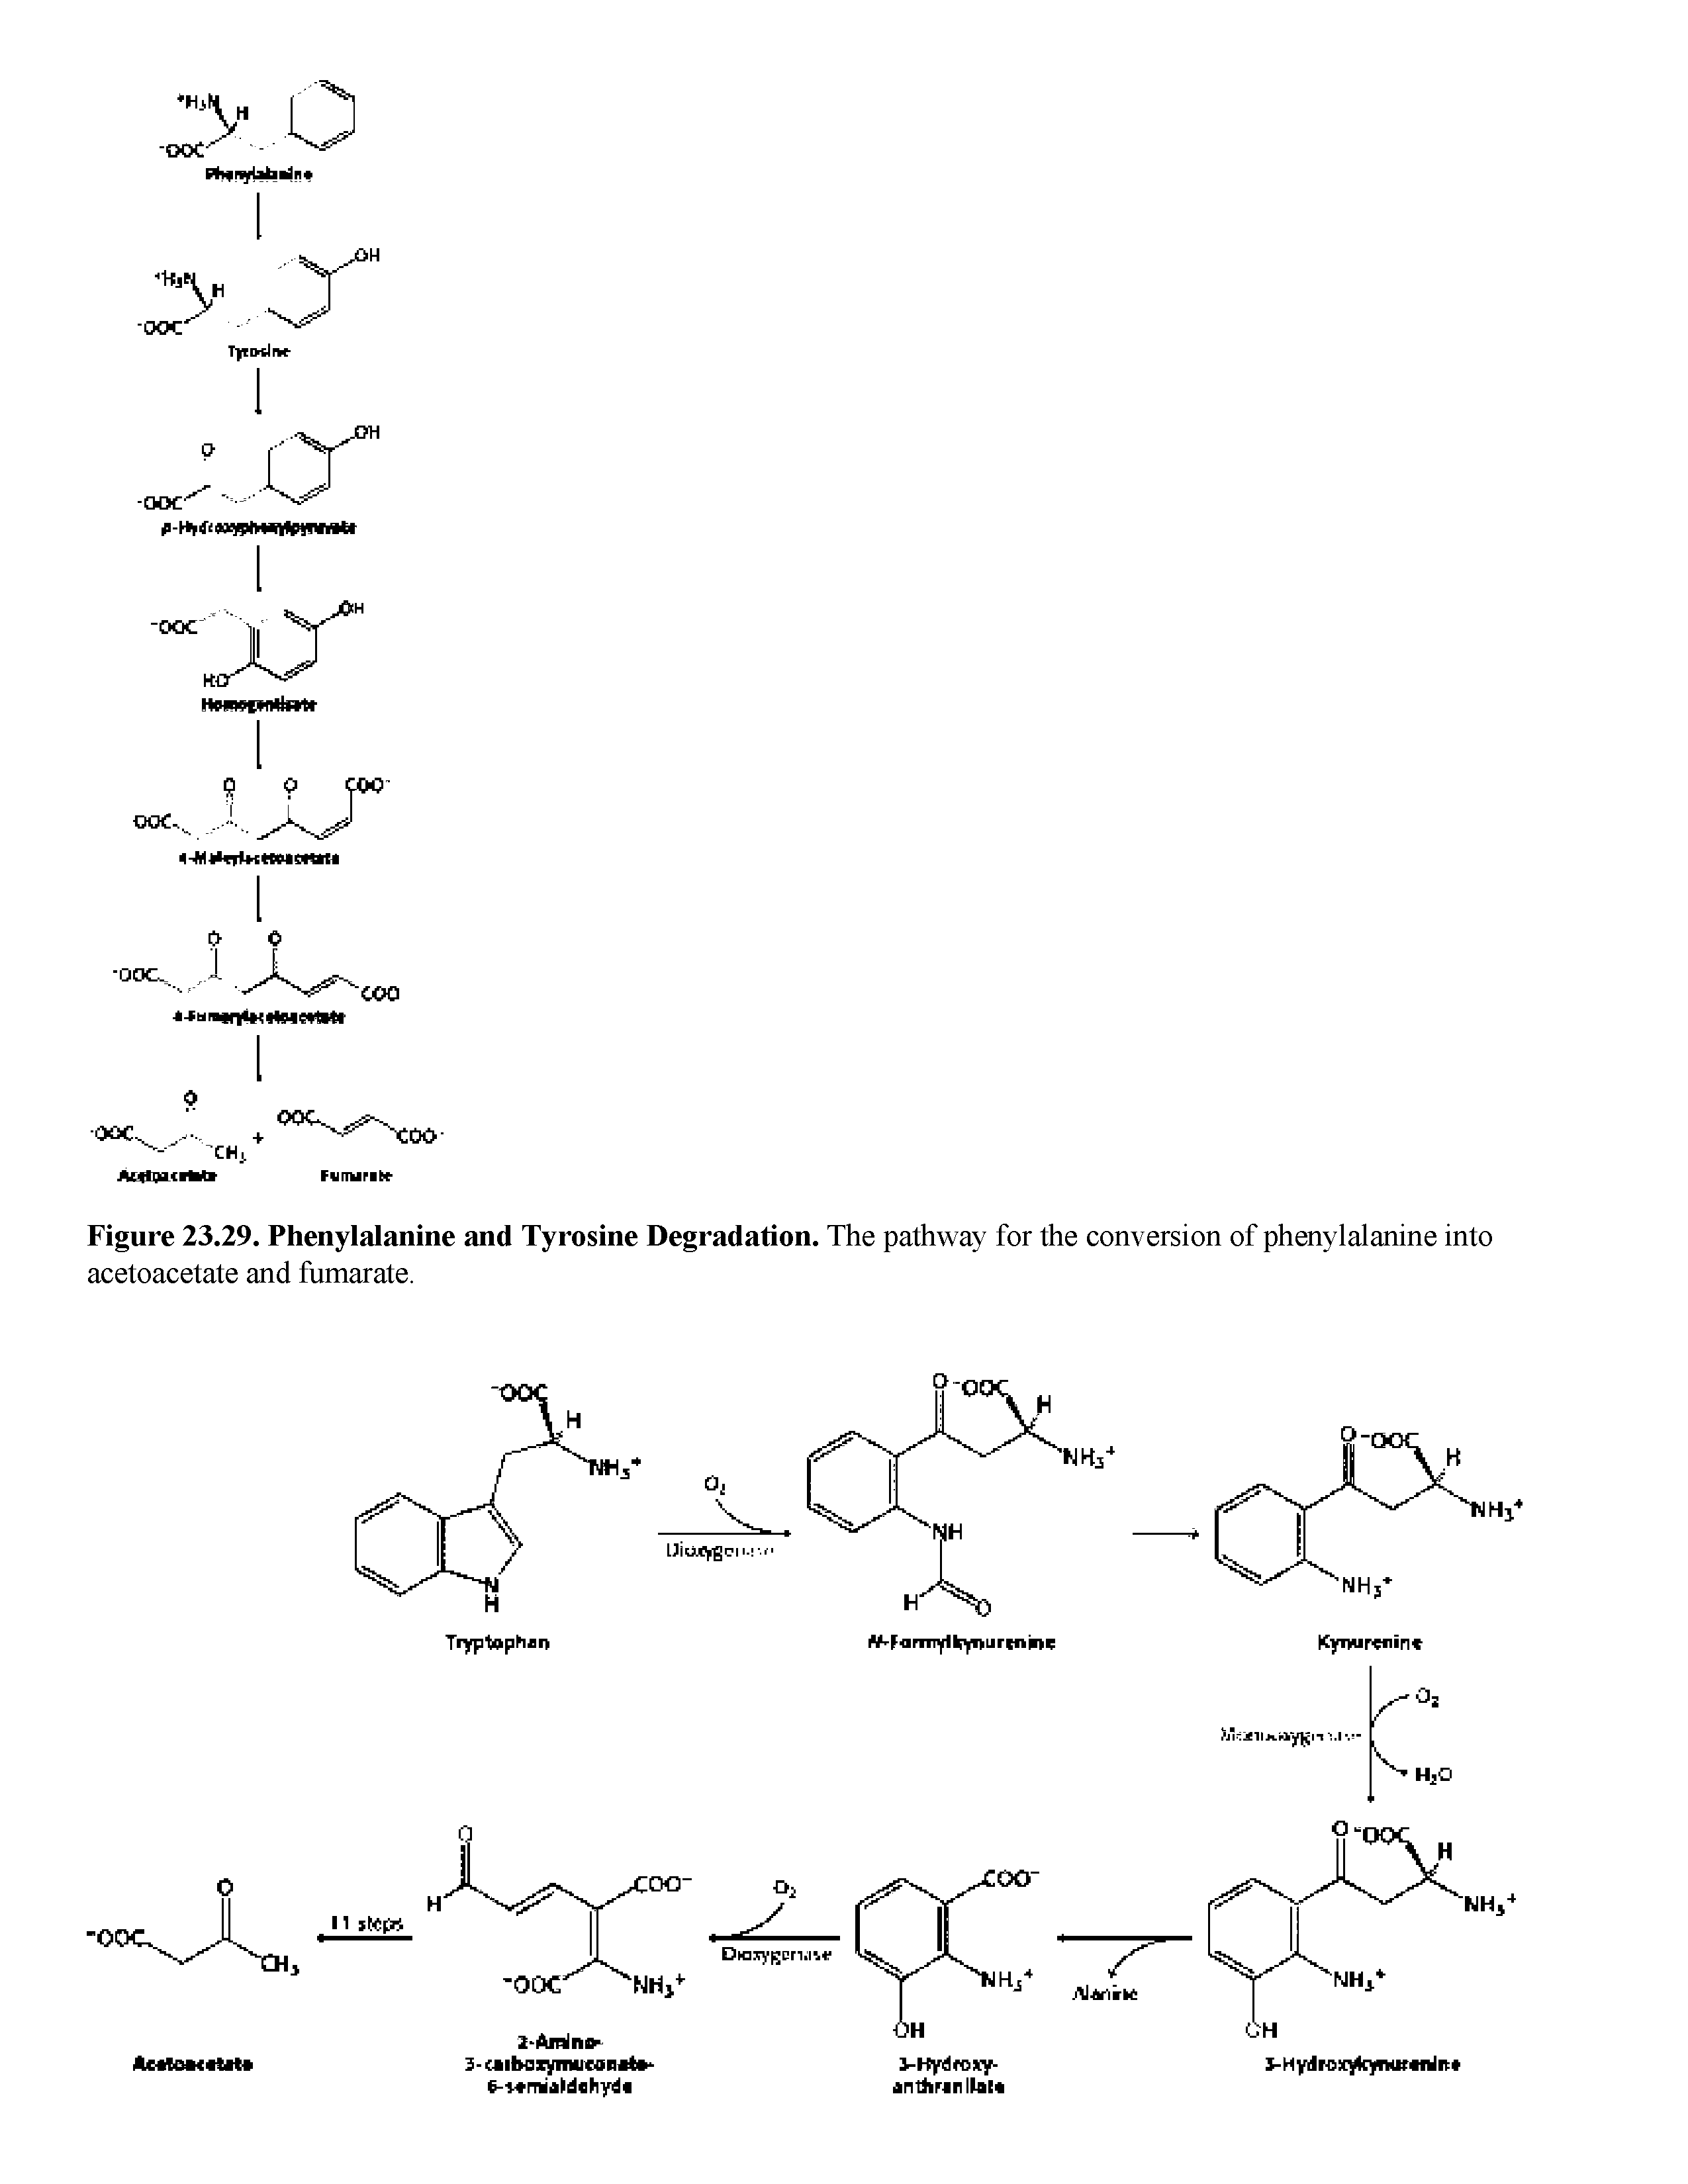 Figure 23.29. Phenylalanine and Tyrosine Degradation. The pathway for the conversion of phenylalanine into acetoacetate and fumarate.